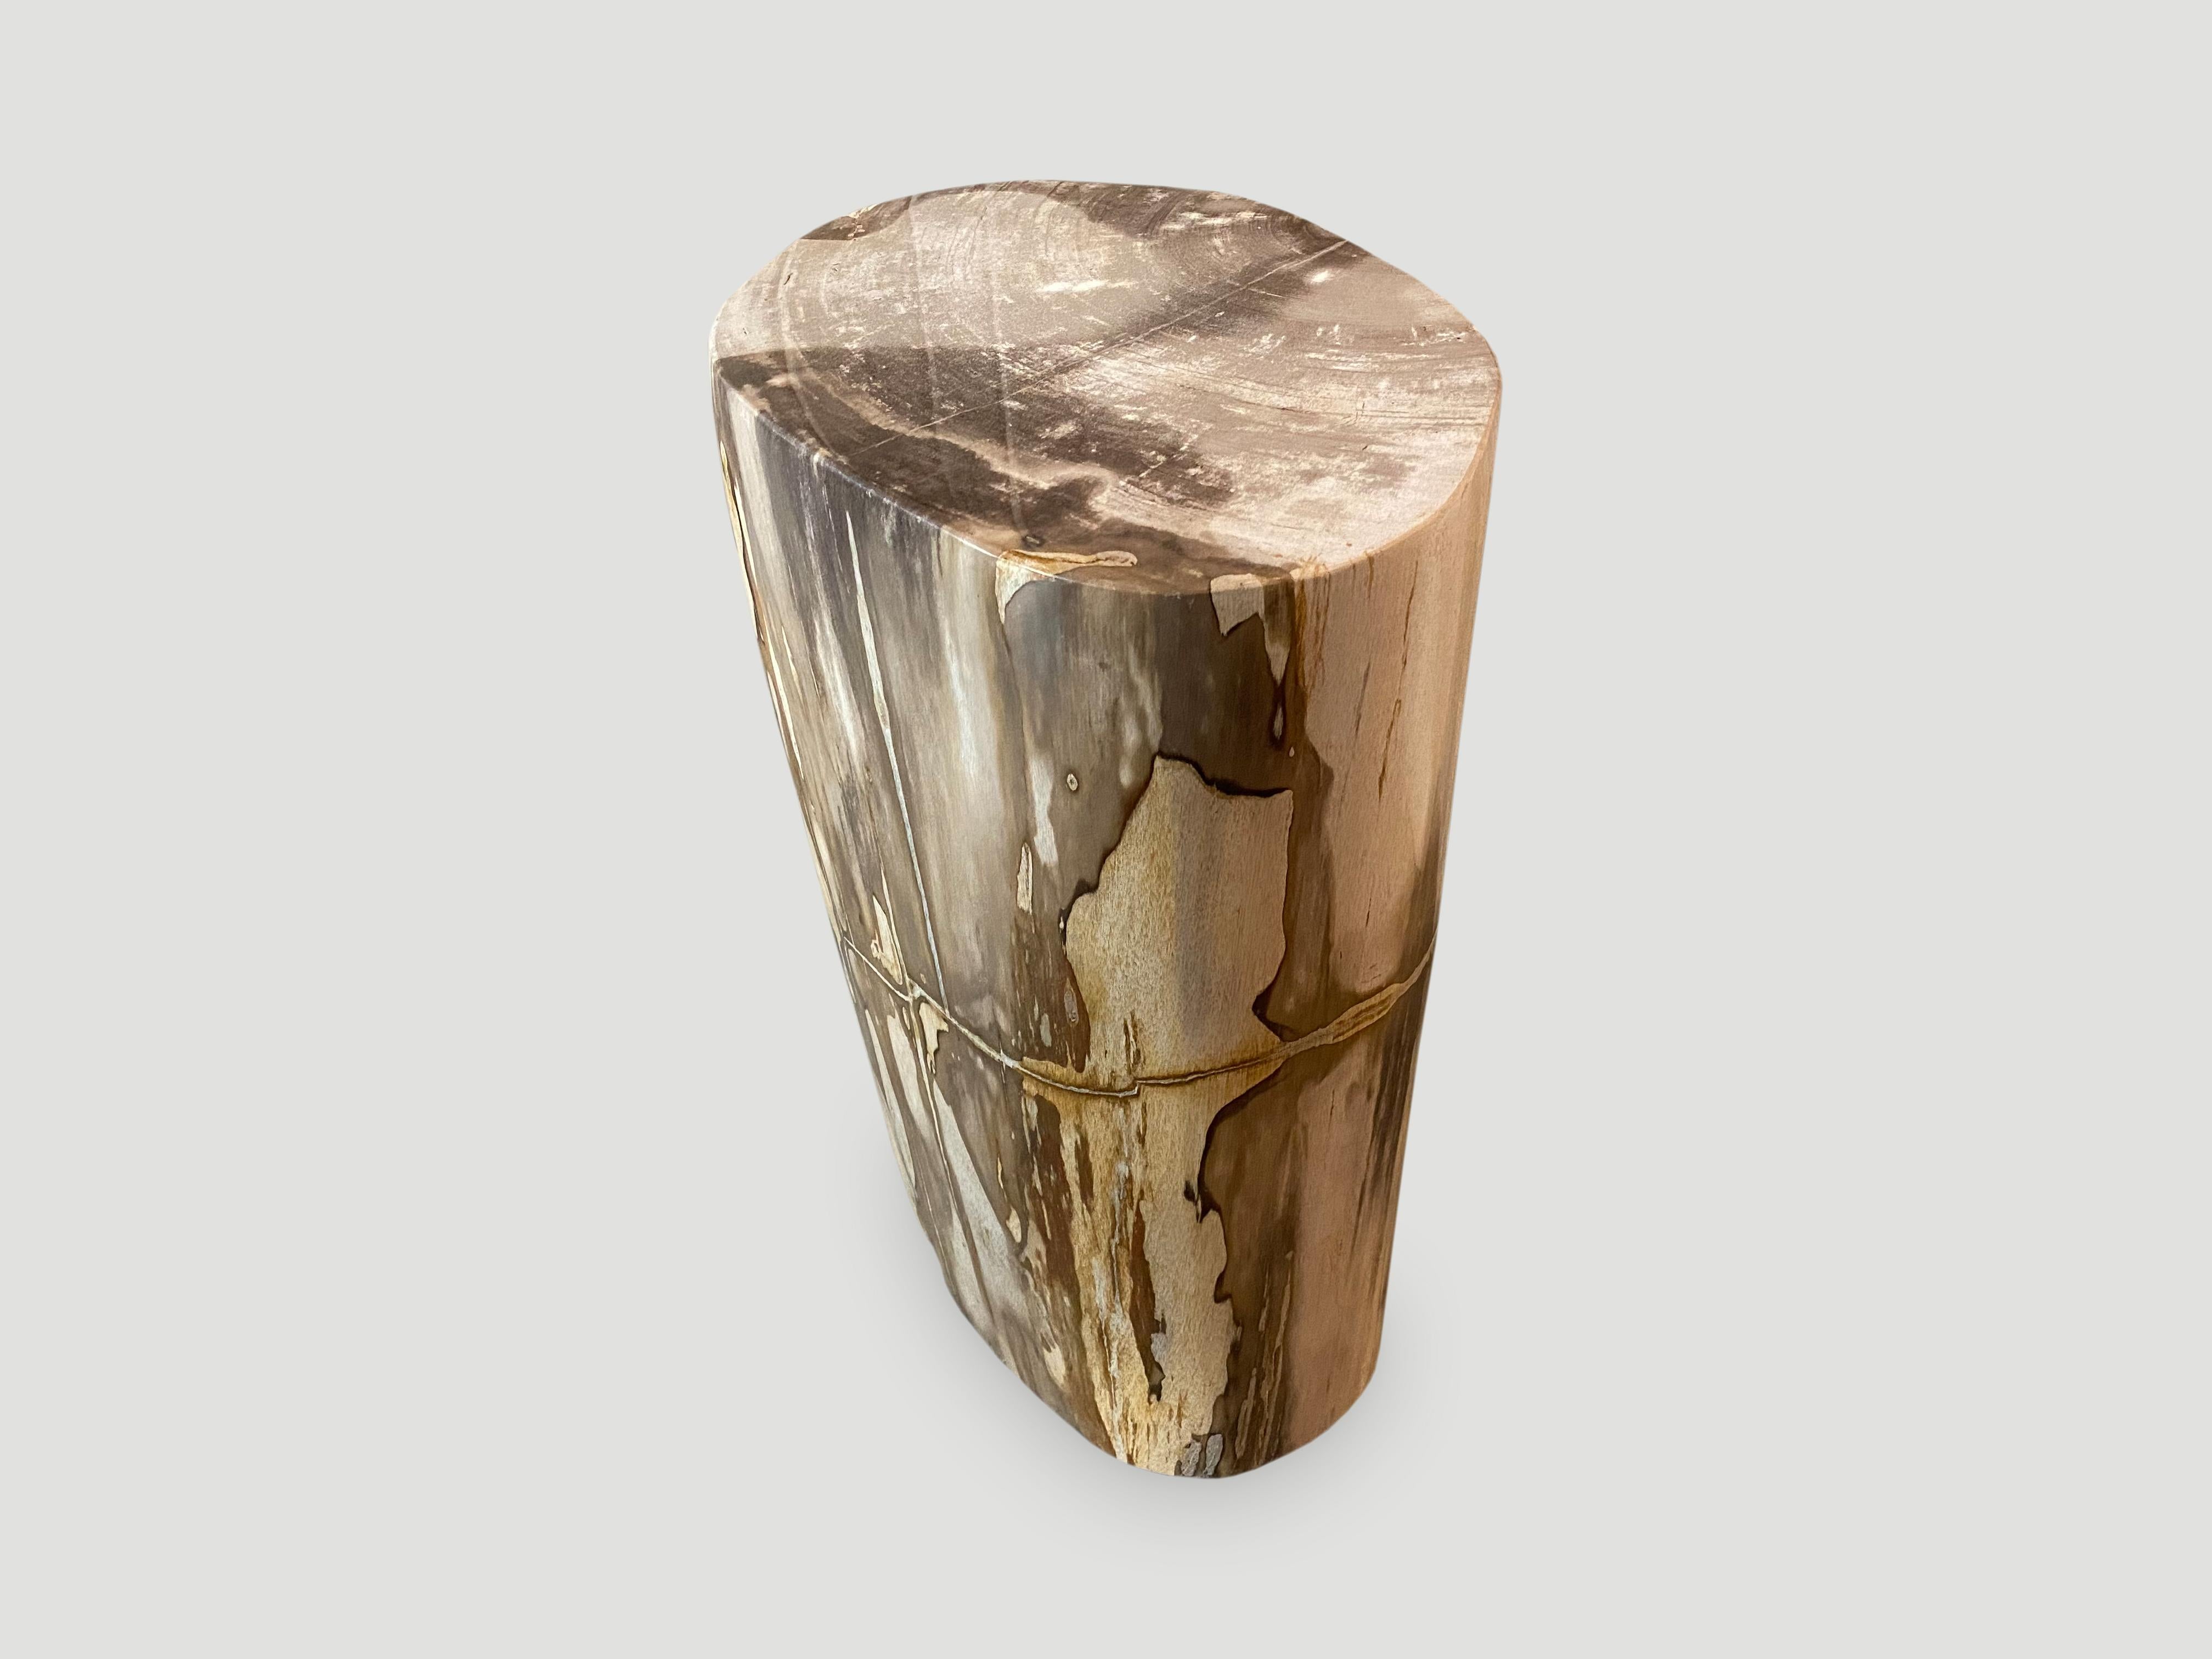 Beautiful high quality petrified wood side table. It’s fascinating how Mother Nature produces these exquisite 40 million year old petrified teak logs with such contrasting colors and natural patterns throughout. Modern yet with so much history. This